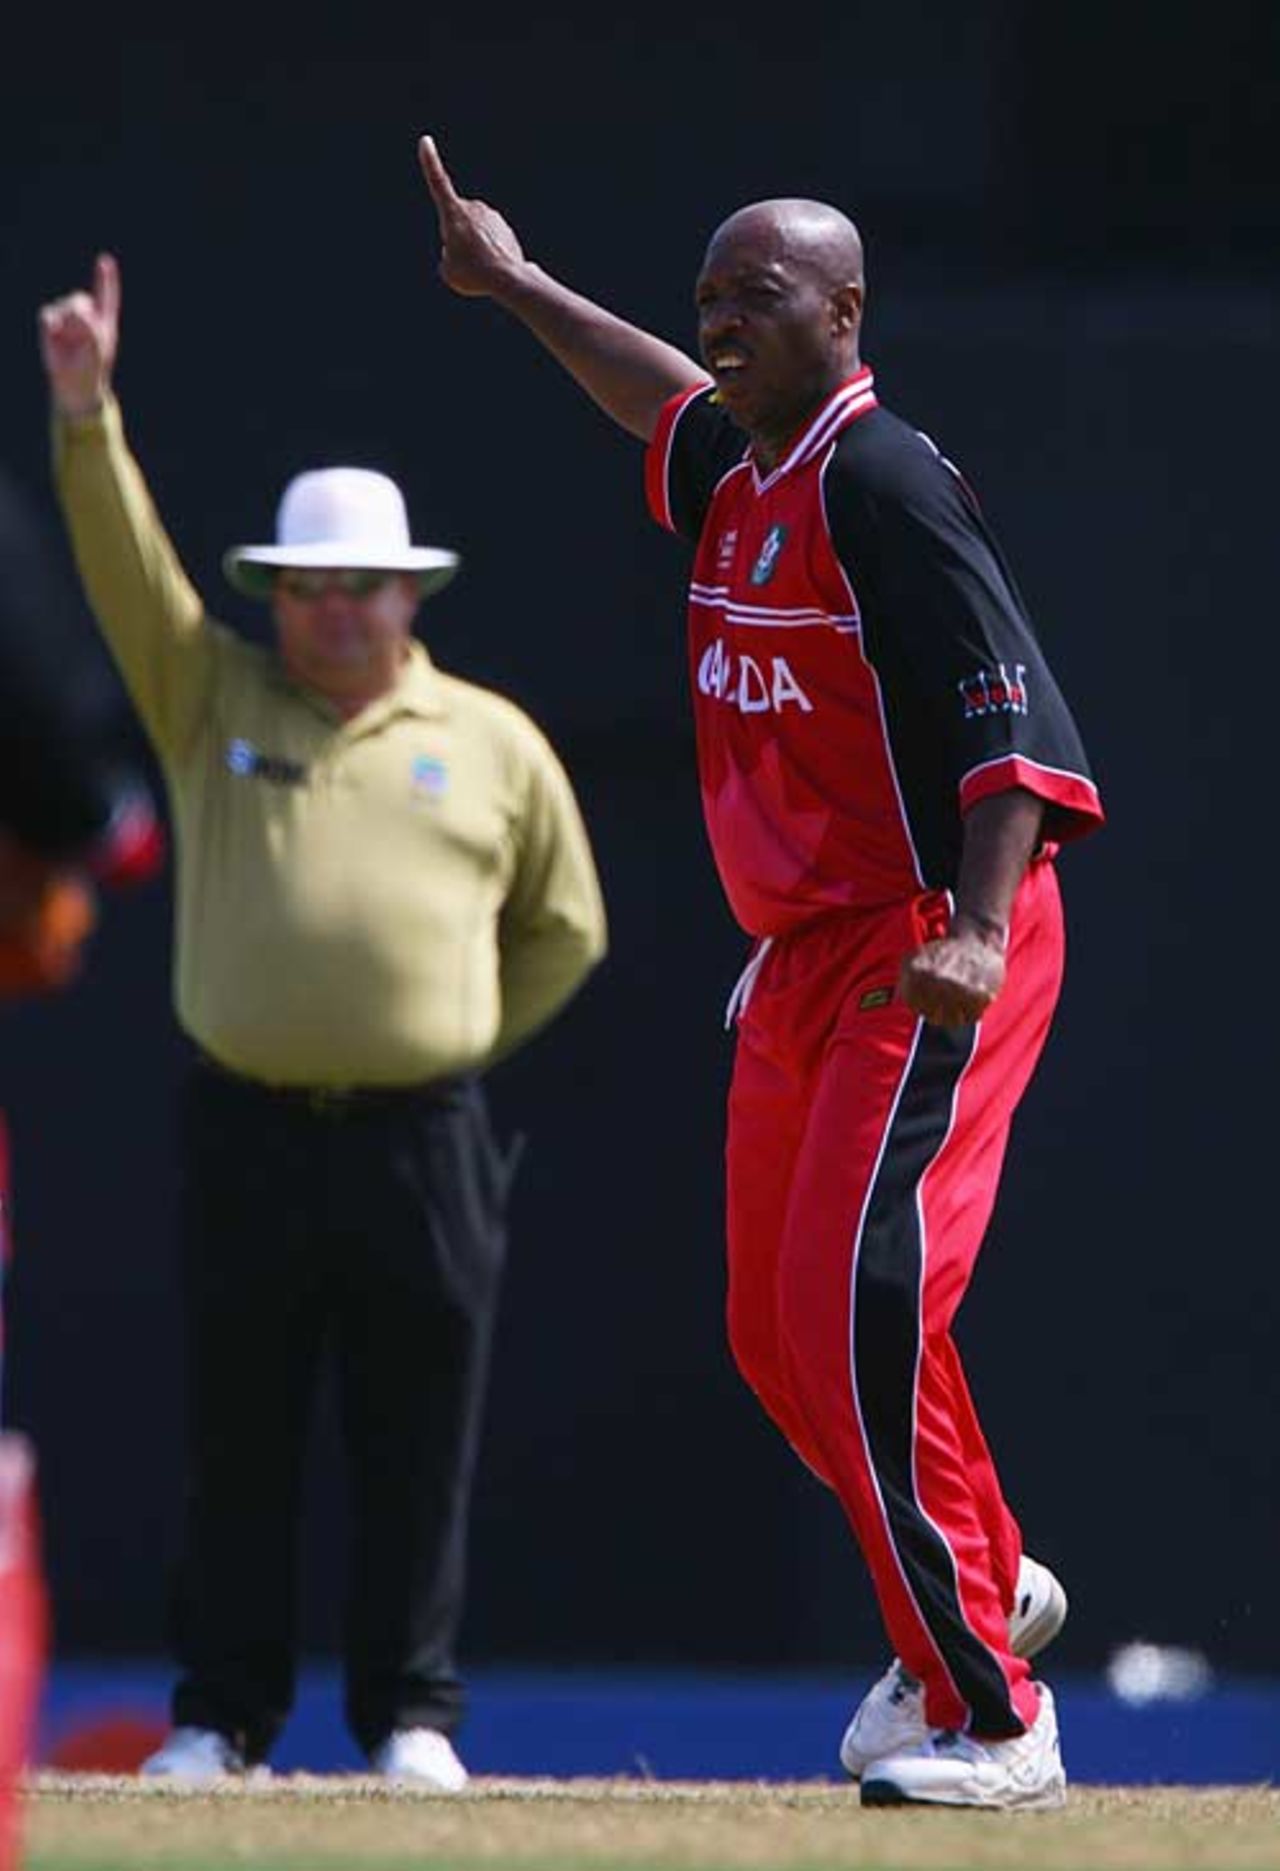 Anderson Cummins gains a decision from Peter Parker, Kenya v Canada, World Cup, Group C, St Lucia, March 14, 2007